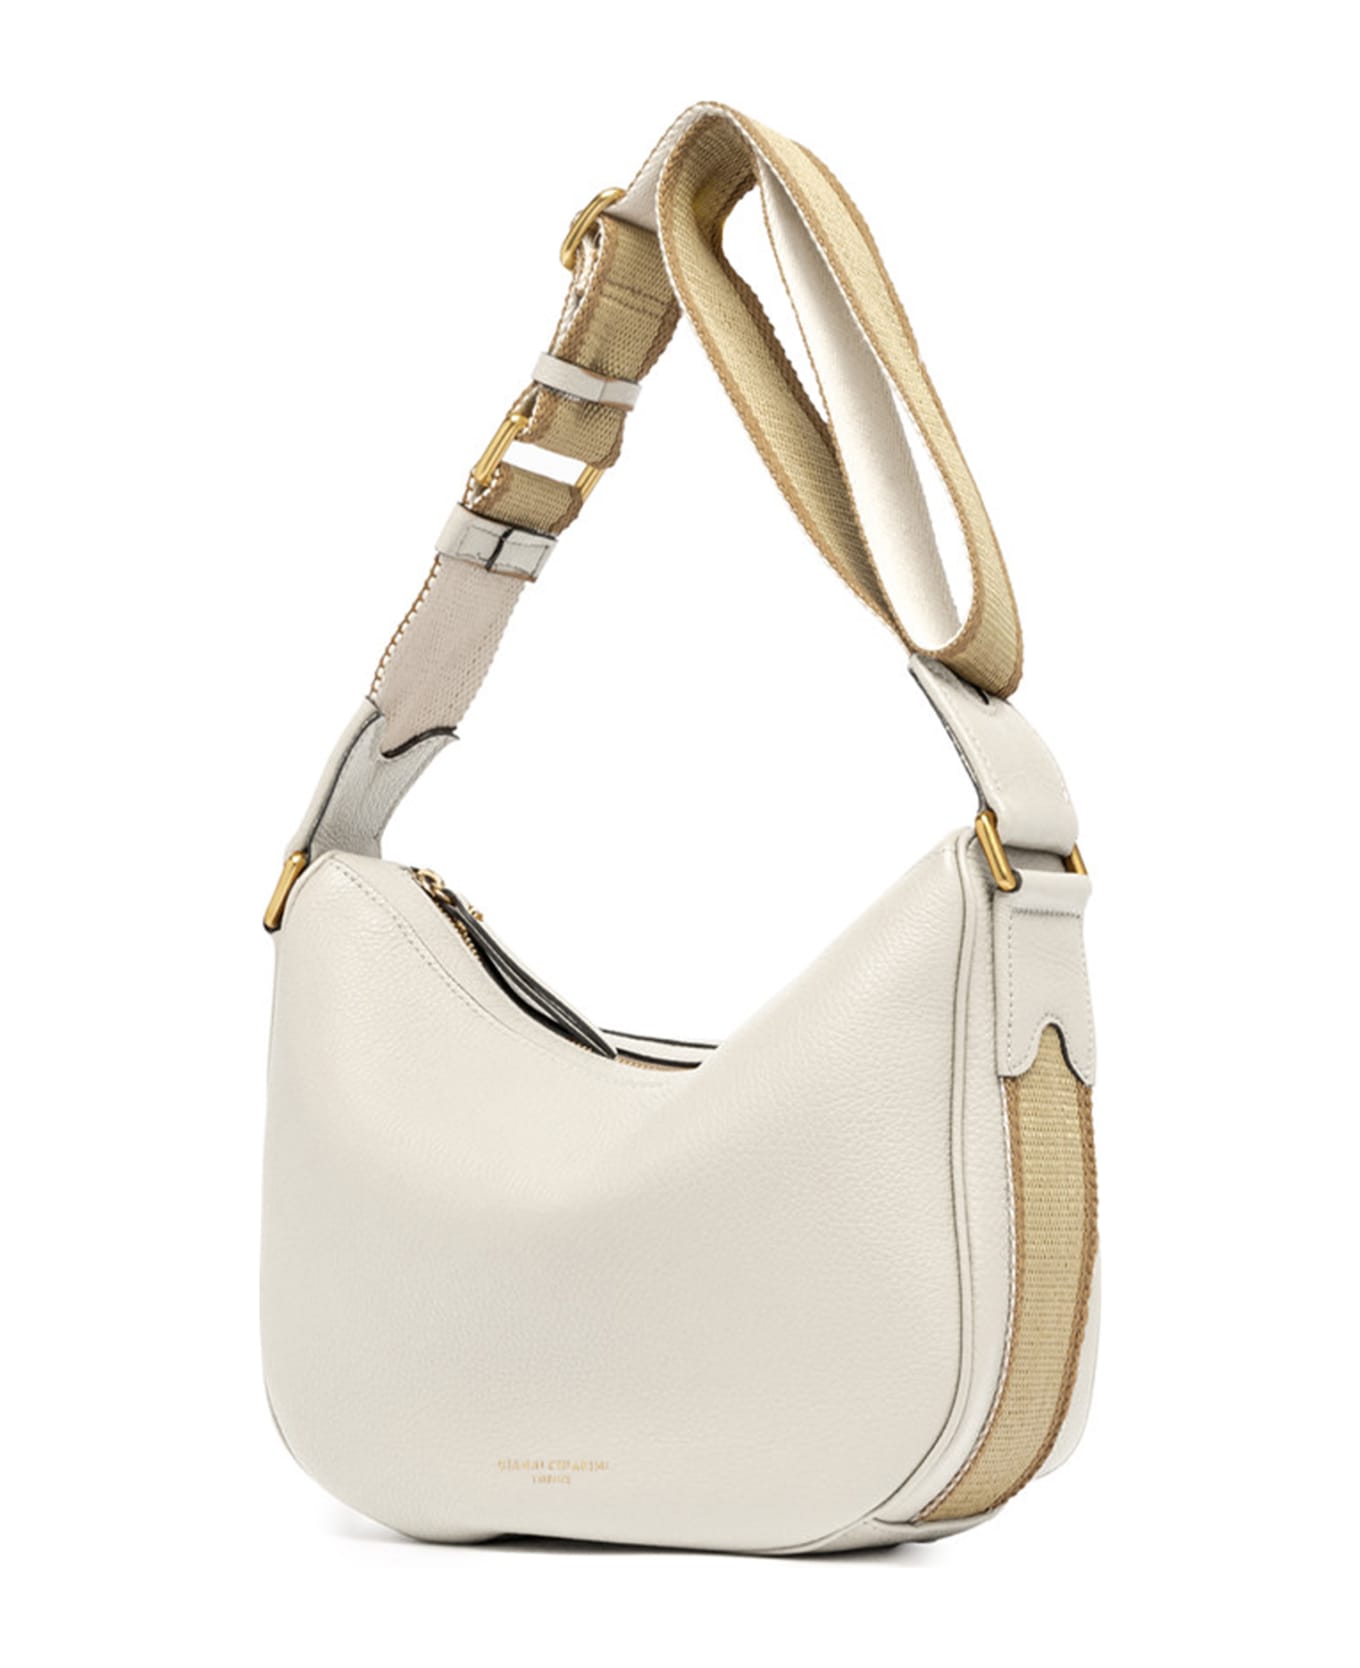 Gianni Chiarini Armonia Shoulder Bag In Hammered Leather - MARBLE